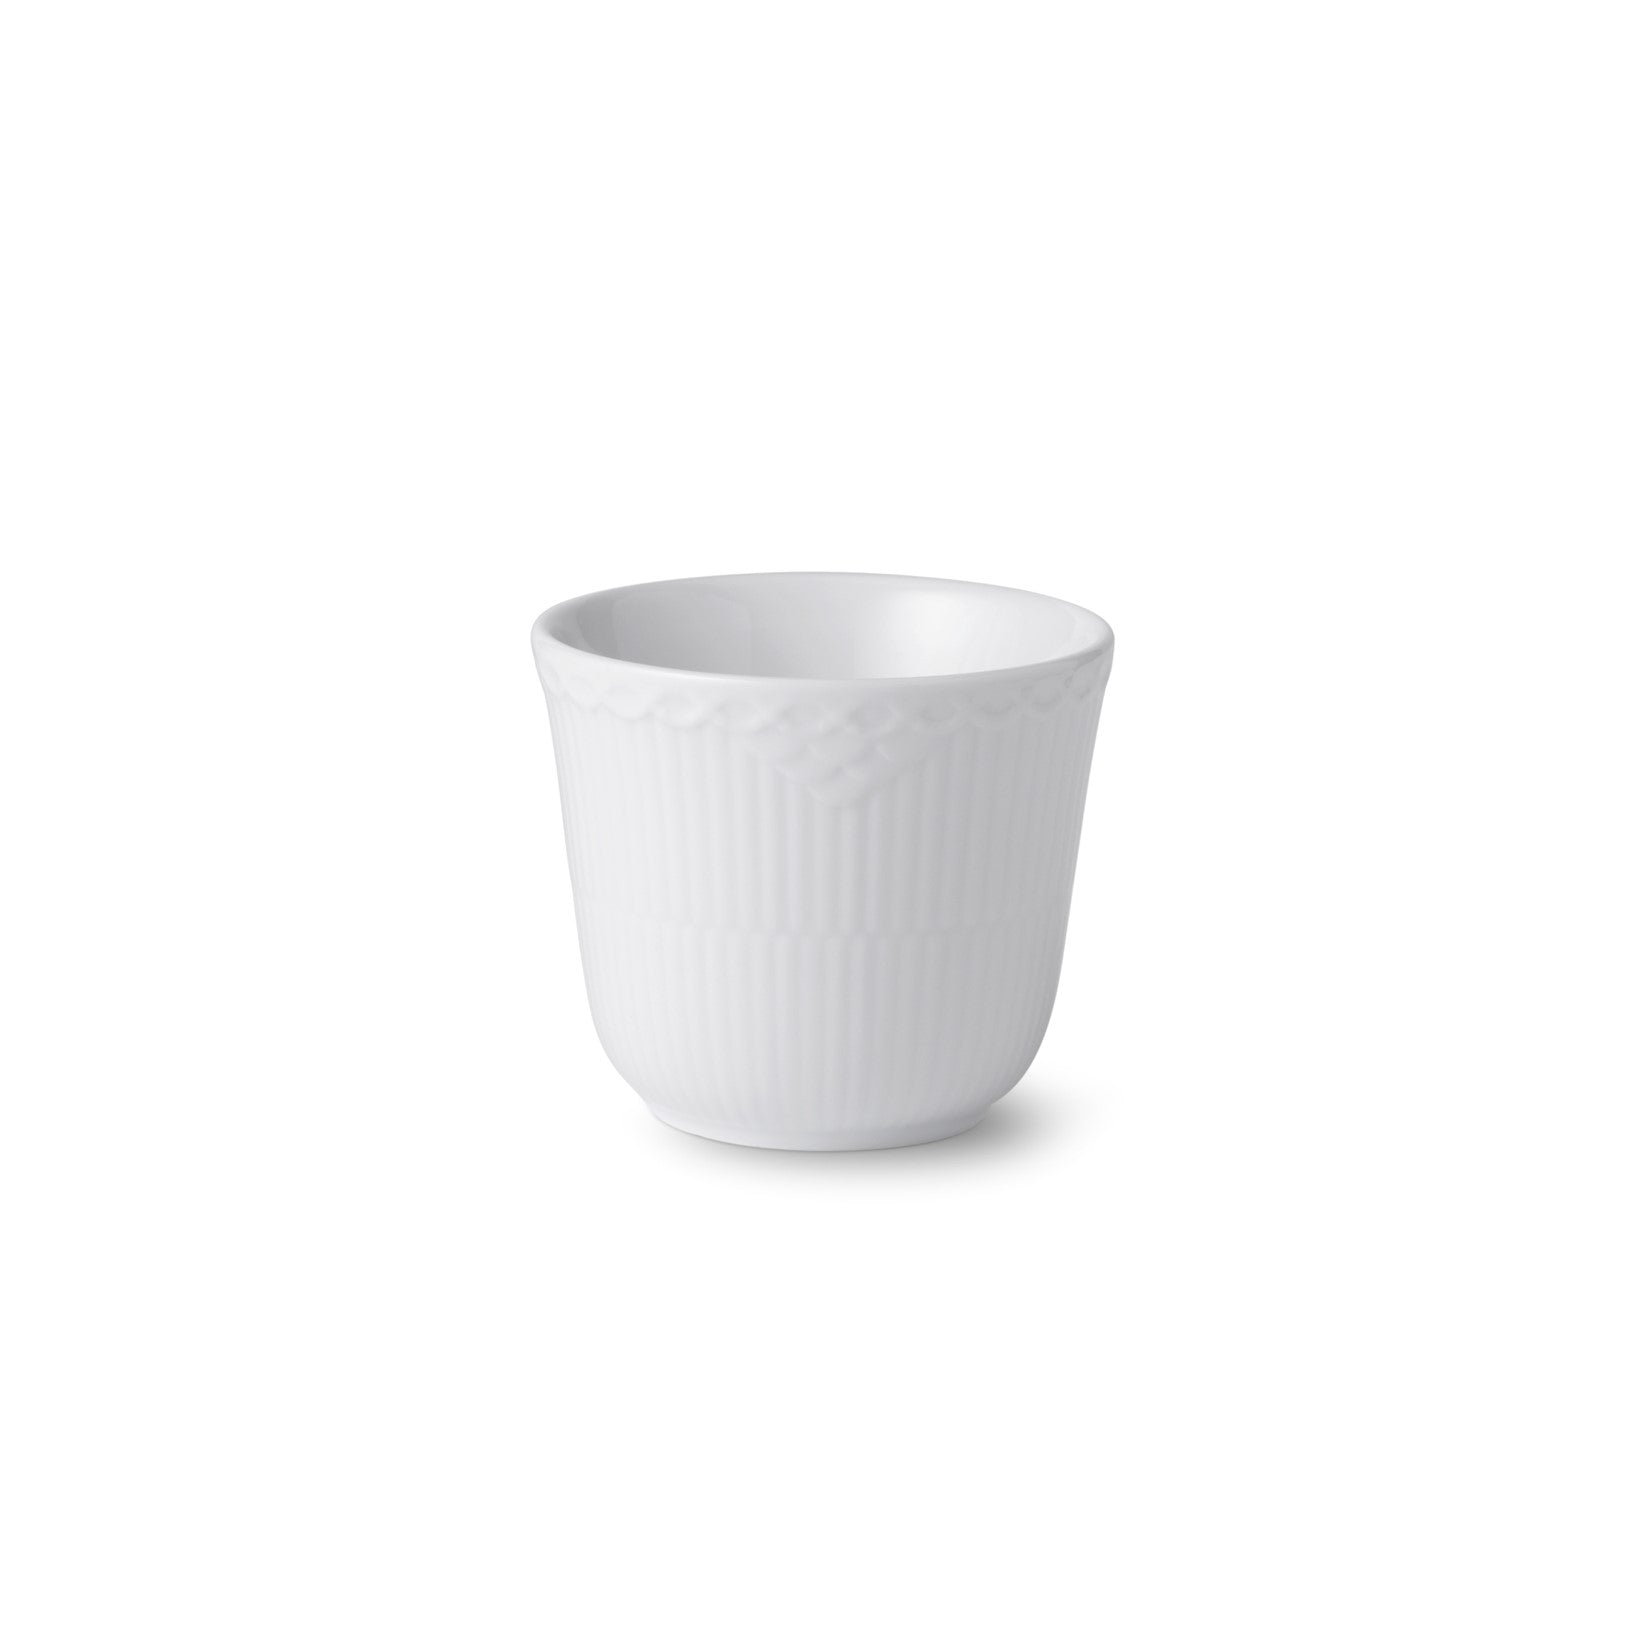 Royal Copenhagen White Fluted Half Lace Thermo Mug, 26cl